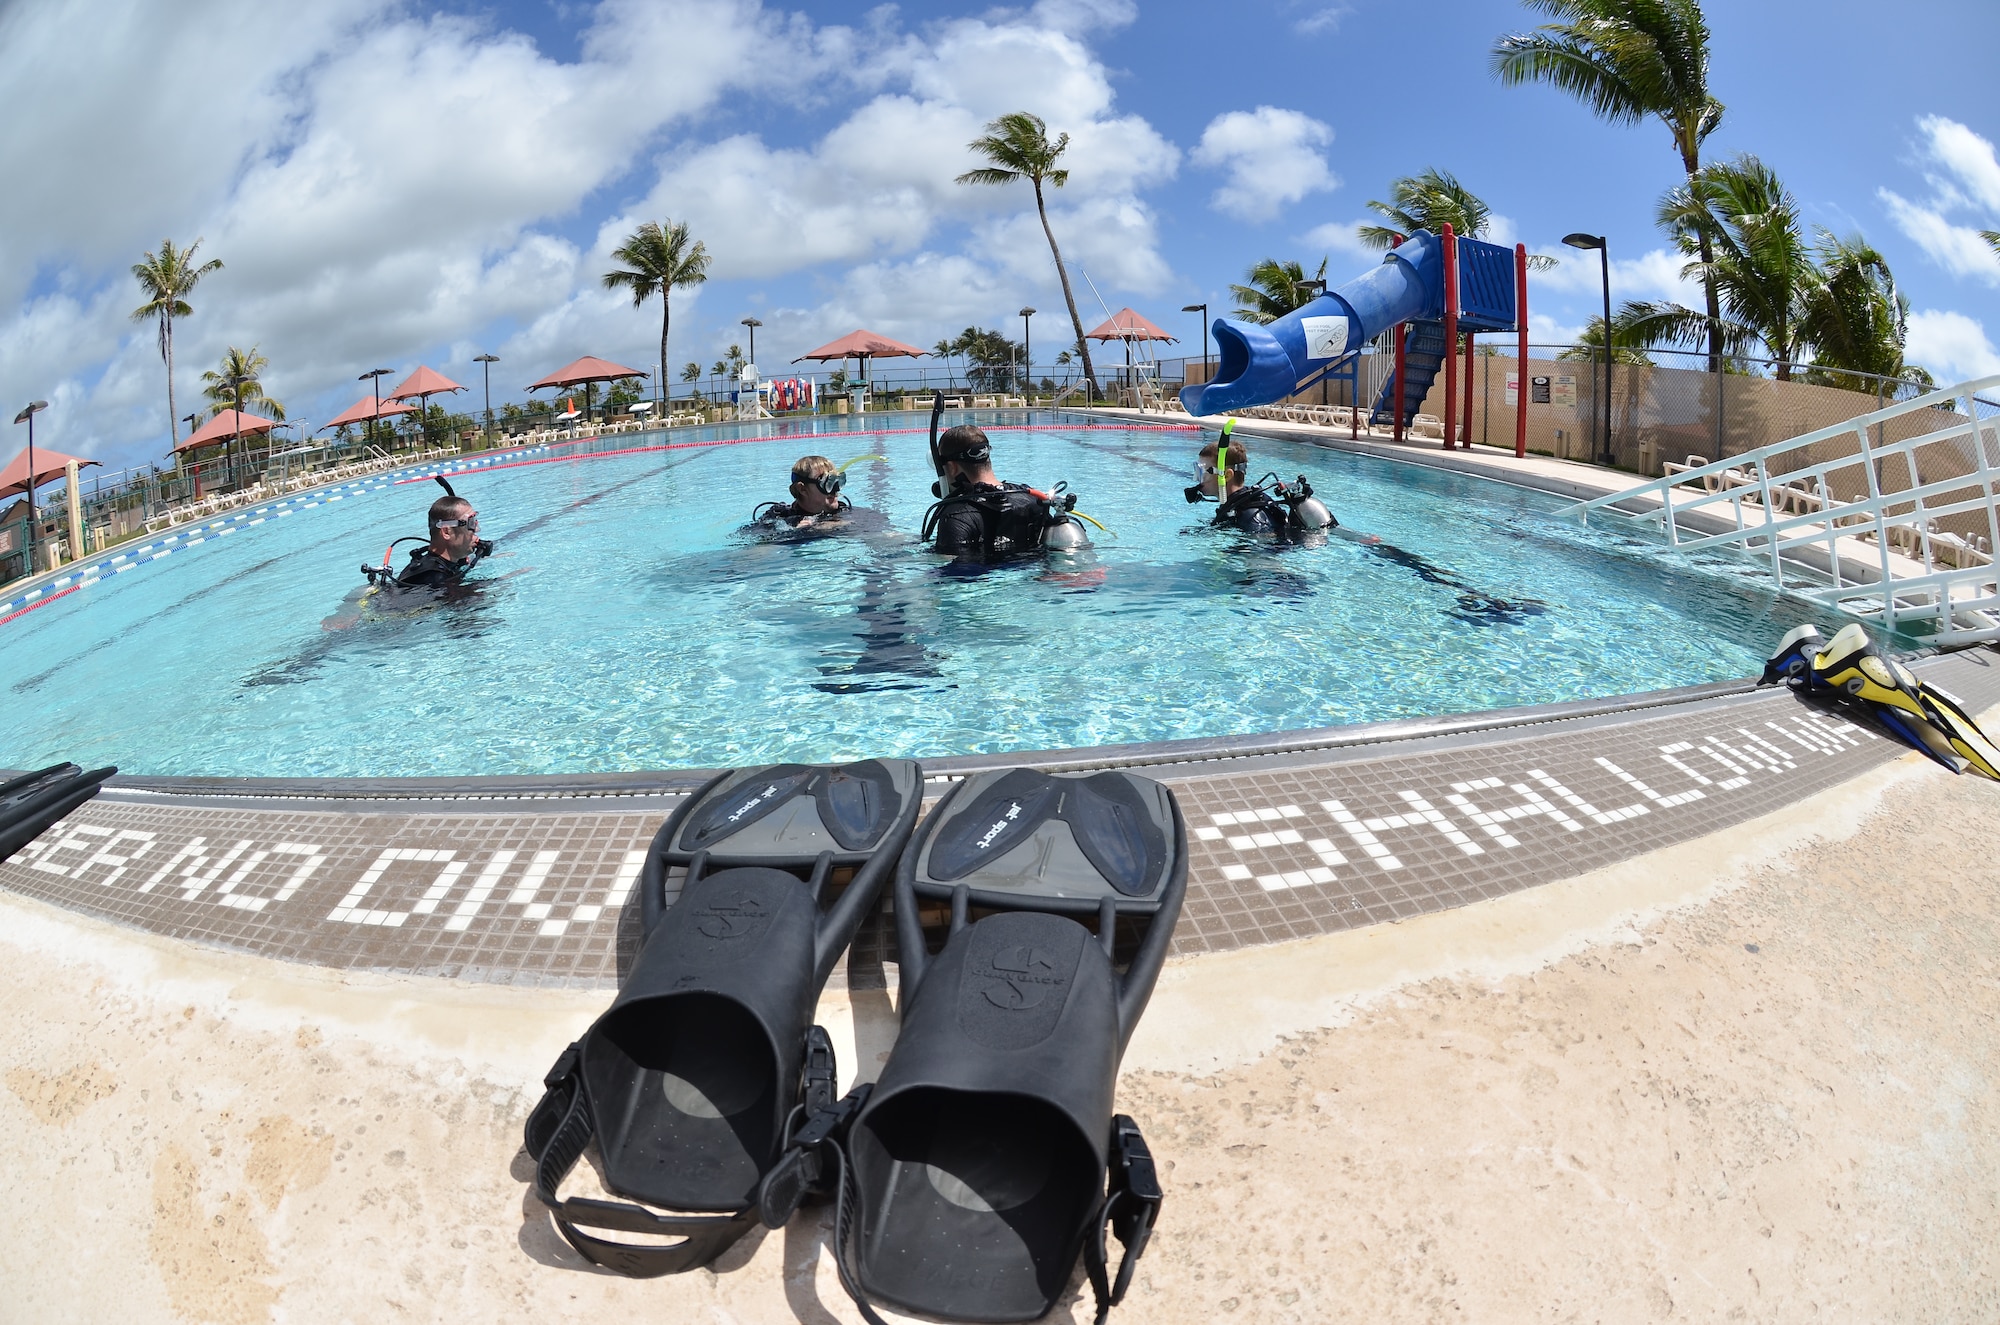 David Jenkins, 36th Force Support Squadron Andersen Family Dive Center instructor, teaches basic scuba skills during an open-water class at the pool on Andersen Air Force Base, Guam, June 22, 2013. Pool dives are an essential part of learning basic skills to prepare divers for the ocean. (U.S. Air Force photo by Staff Sgt. Veronica Montes/Released)